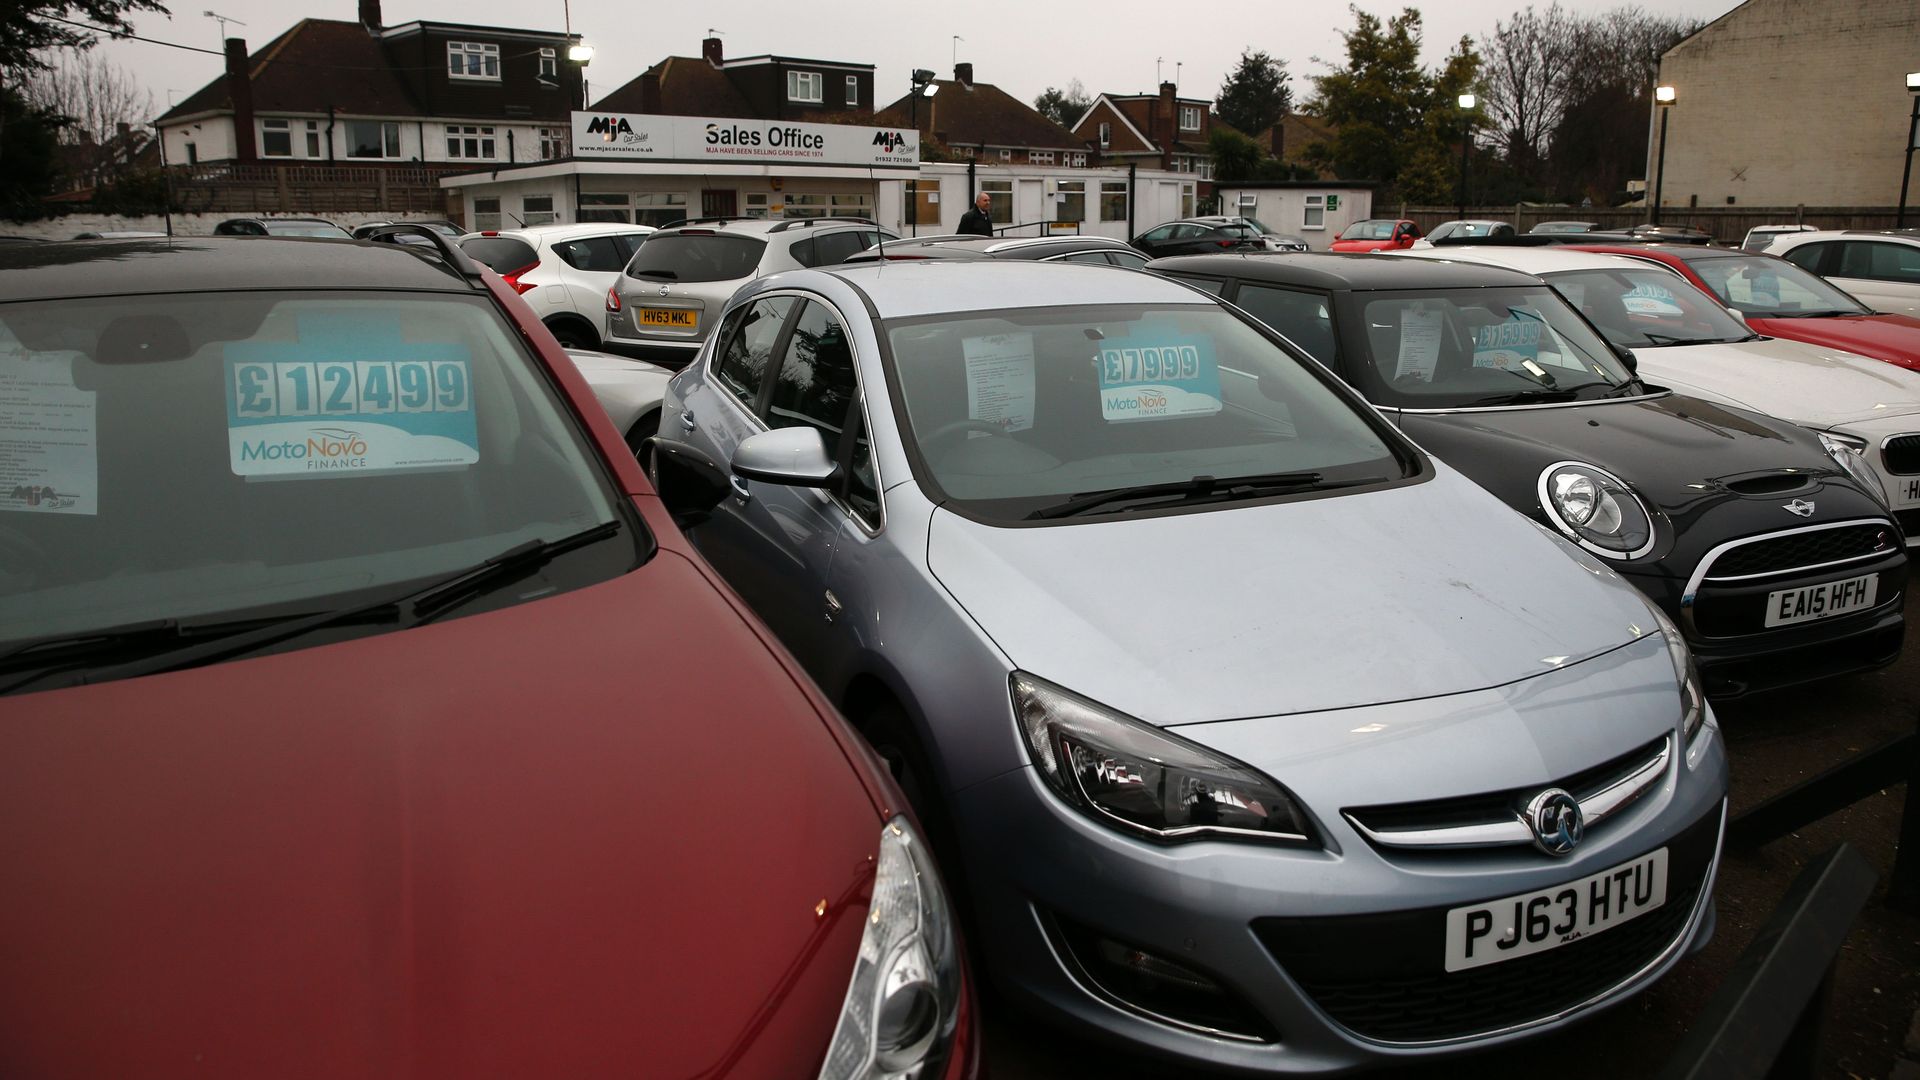 Second hand car sales in Britain